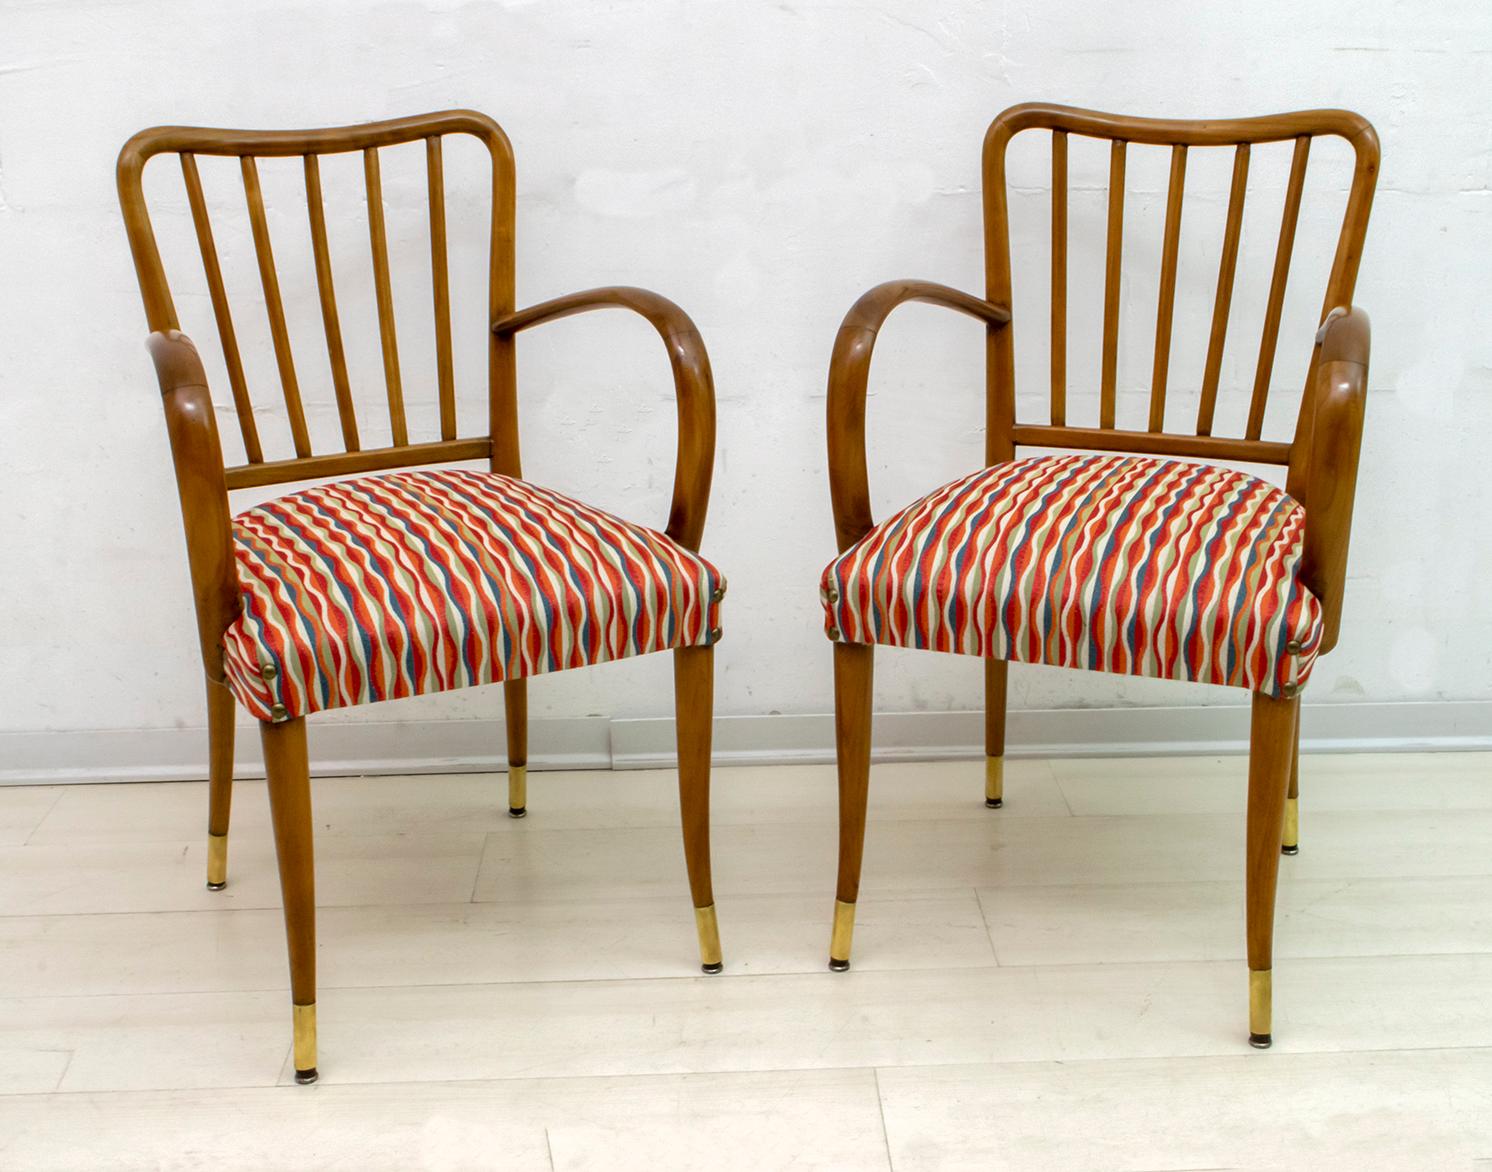 Beautiful pair of chairs with armrests, made by Paolo Buffa in 1950. The structure in curved, patinated wood, the legs with brass terminals, the covering has been redone in a beautiful 1950s style fabric.